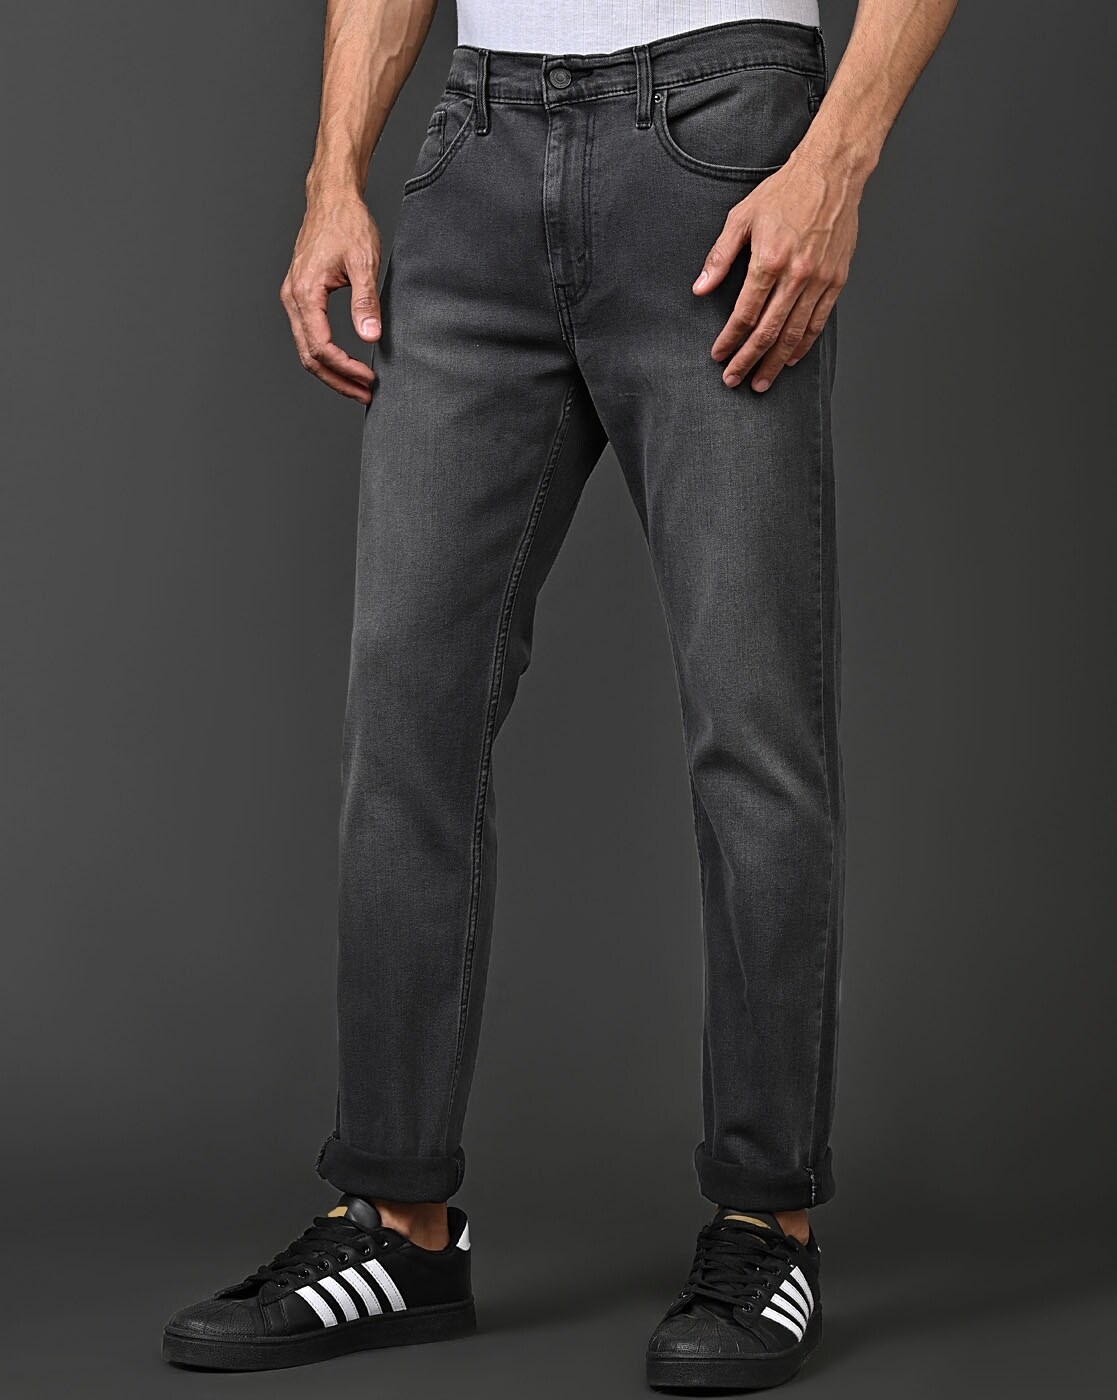 Kobe Comfort Grey Grinding Wash Straight Fit Jeans